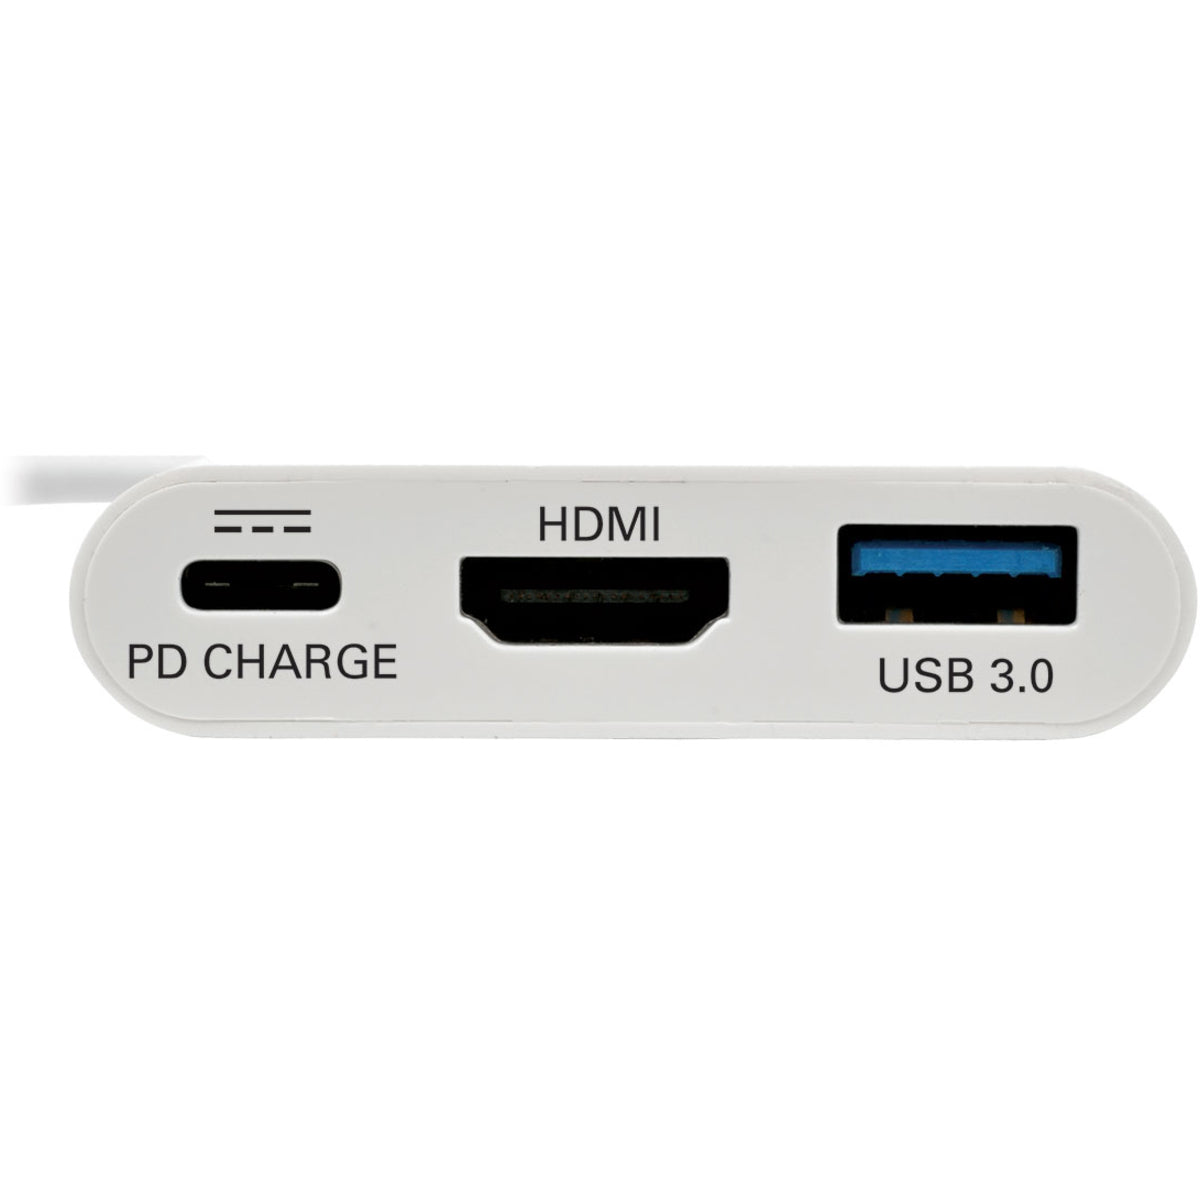 Tripp Lite U444-06N-H4U-C USB-A Hub and USB-C Charging Ports, External Graphic Adapter